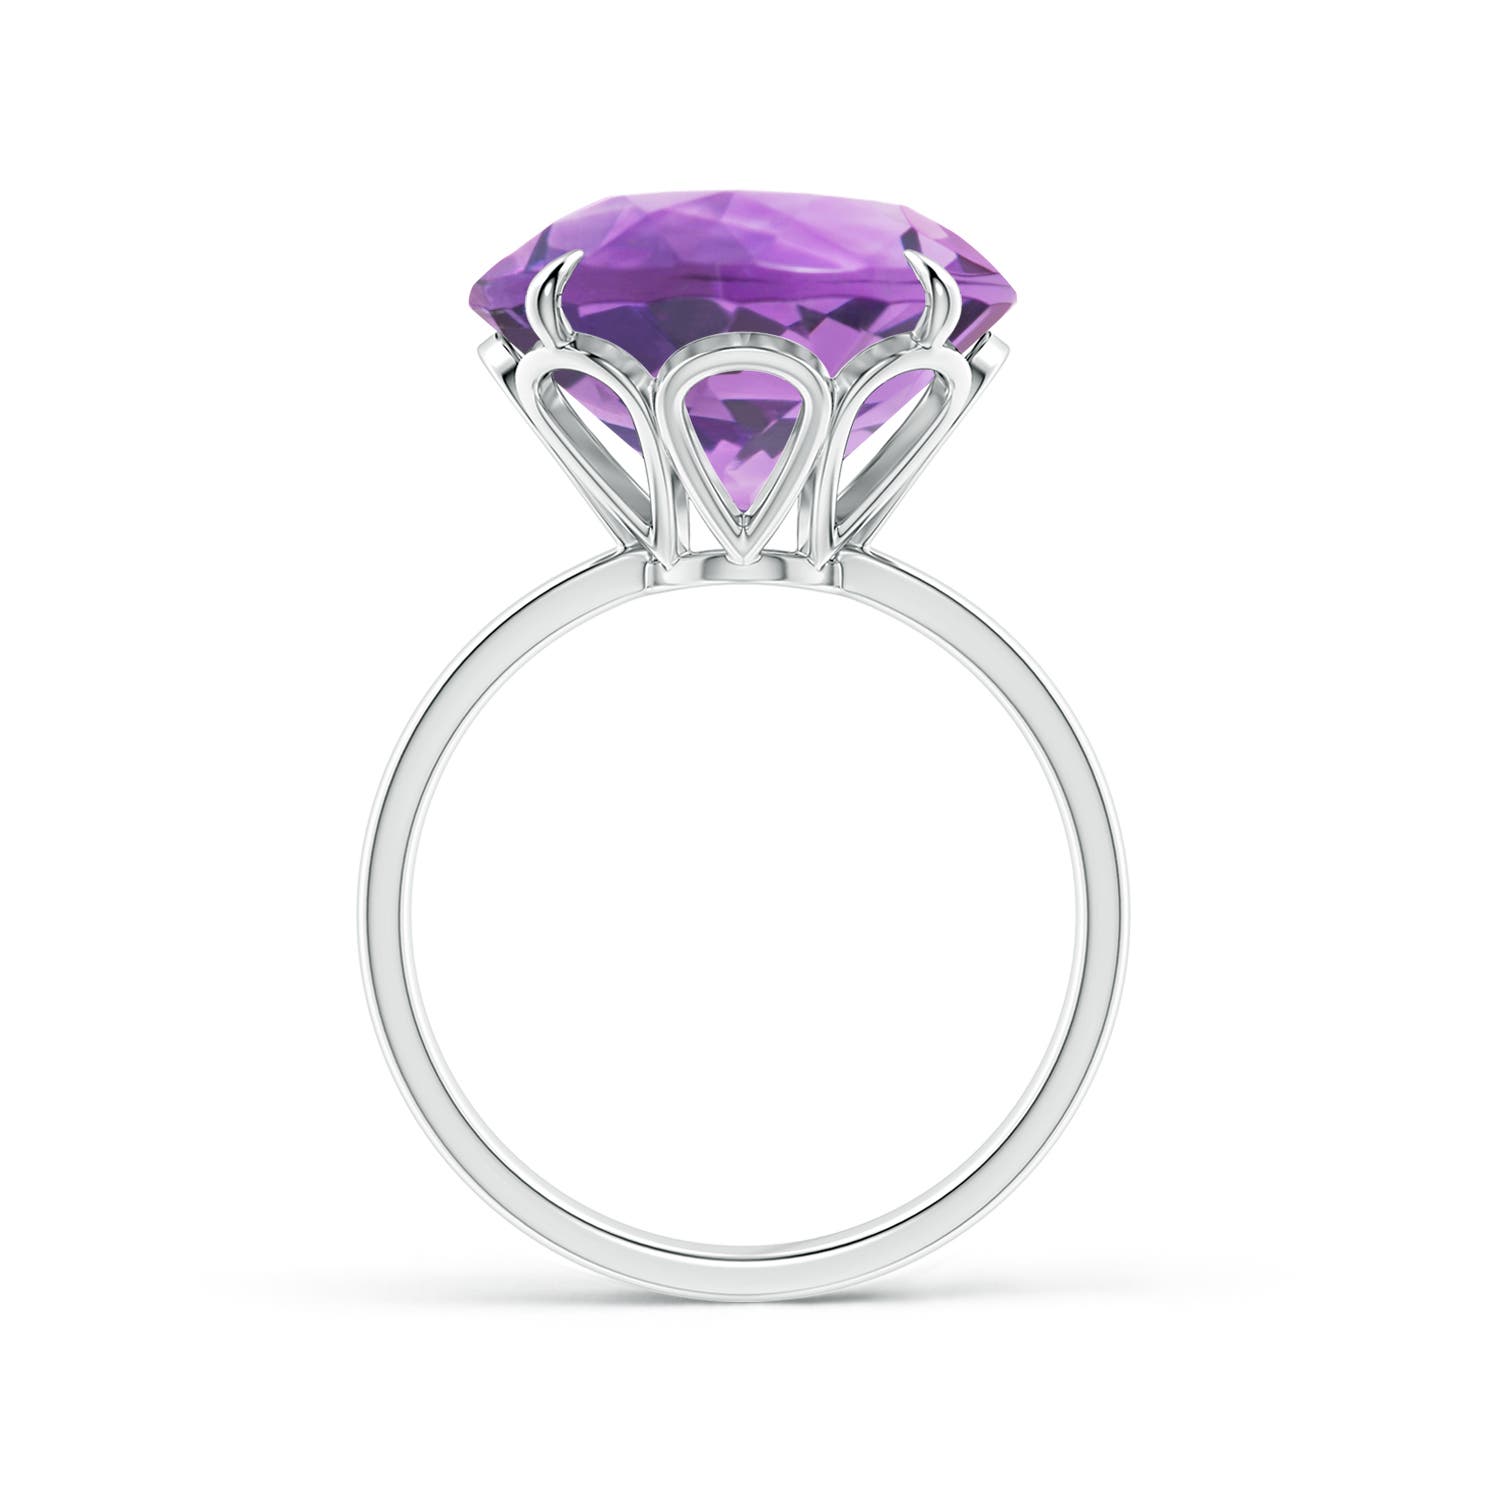 A - Amethyst / 8.5 CT / 14 KT White Gold